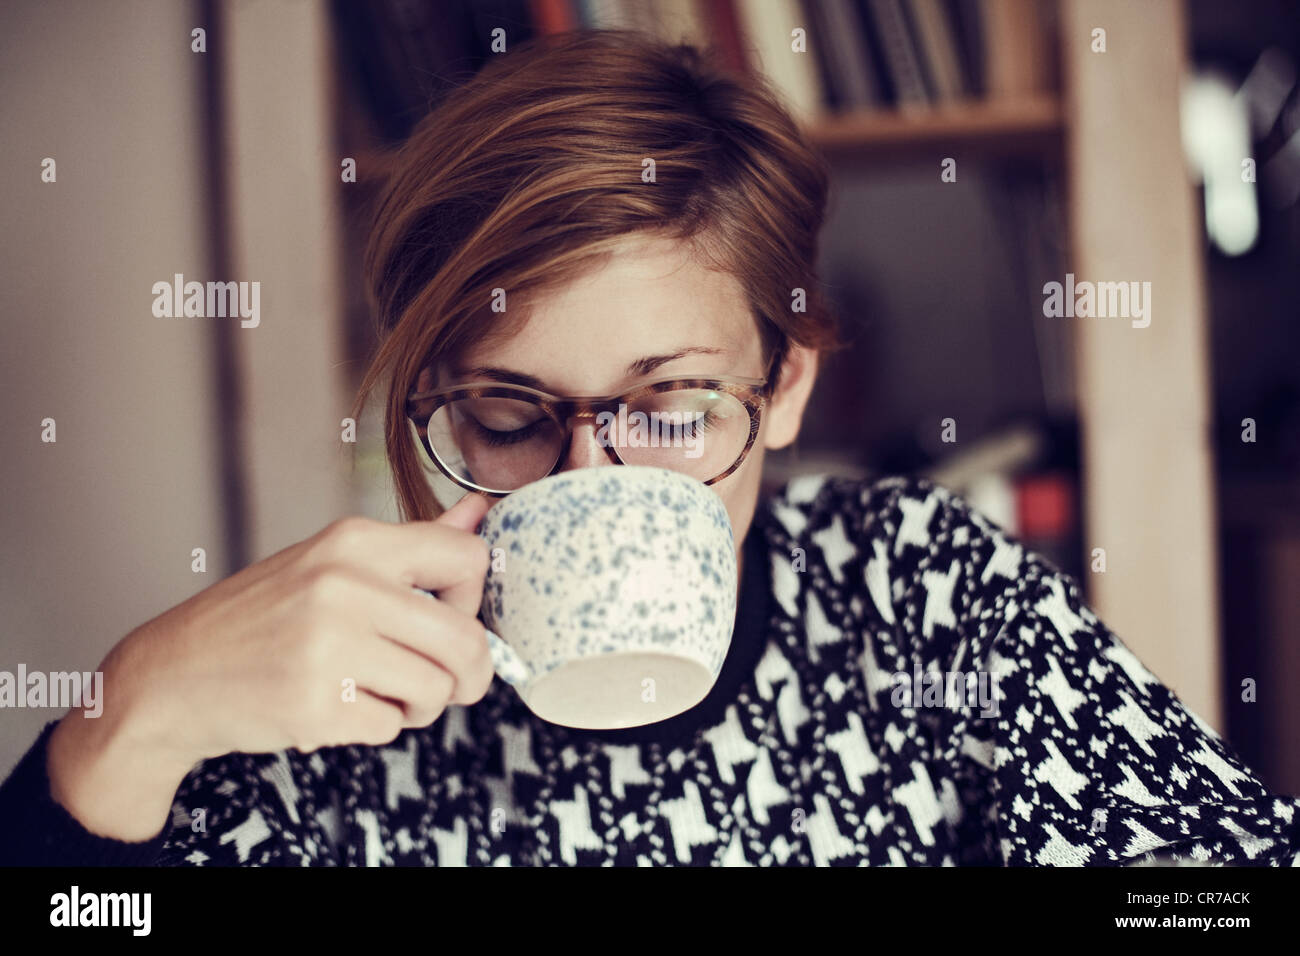 Germany, Young woman drinking, close up Stock Photo